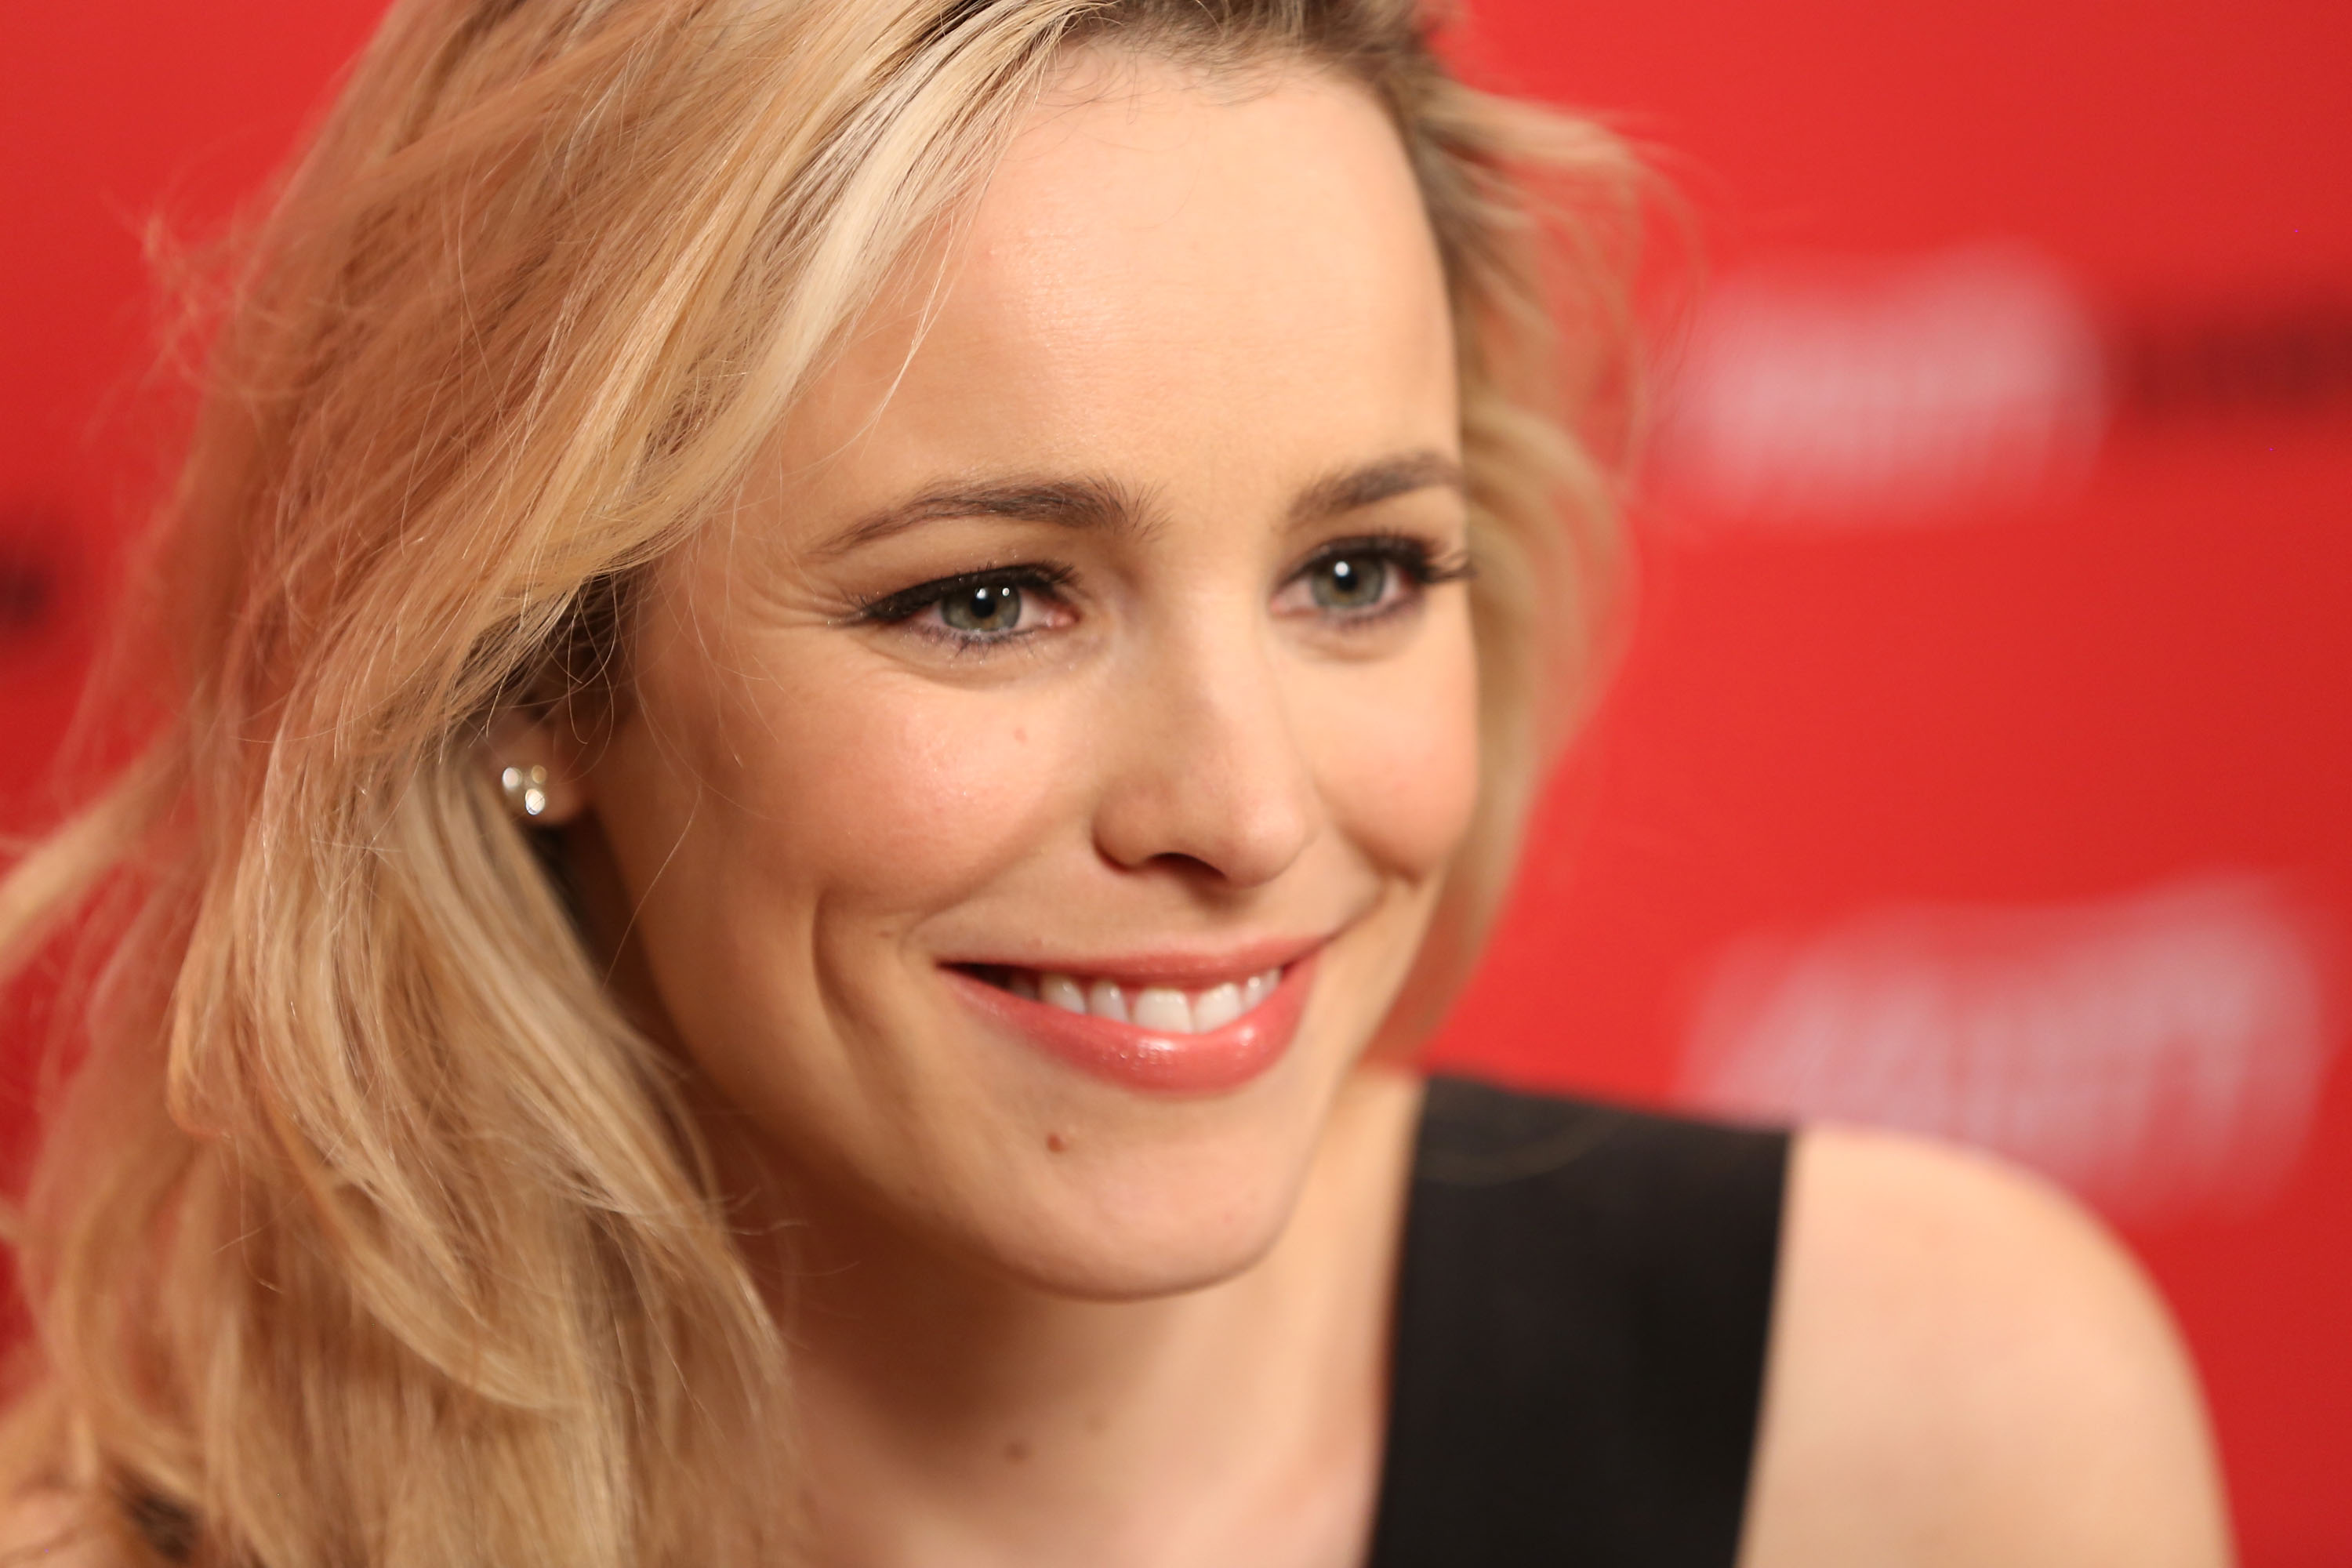 TORONTO, ON - SEPTEMBER 11: Actress Rachel McAdams attends the Variety Studio Presented By Moroccanoil during the Toronto International Film Festival at Holt Renfrew at Holt Renfrew, Toronto on September 11, 2012 in Toronto, Canada. (Photo by Jonathan Leibson/WireImage)